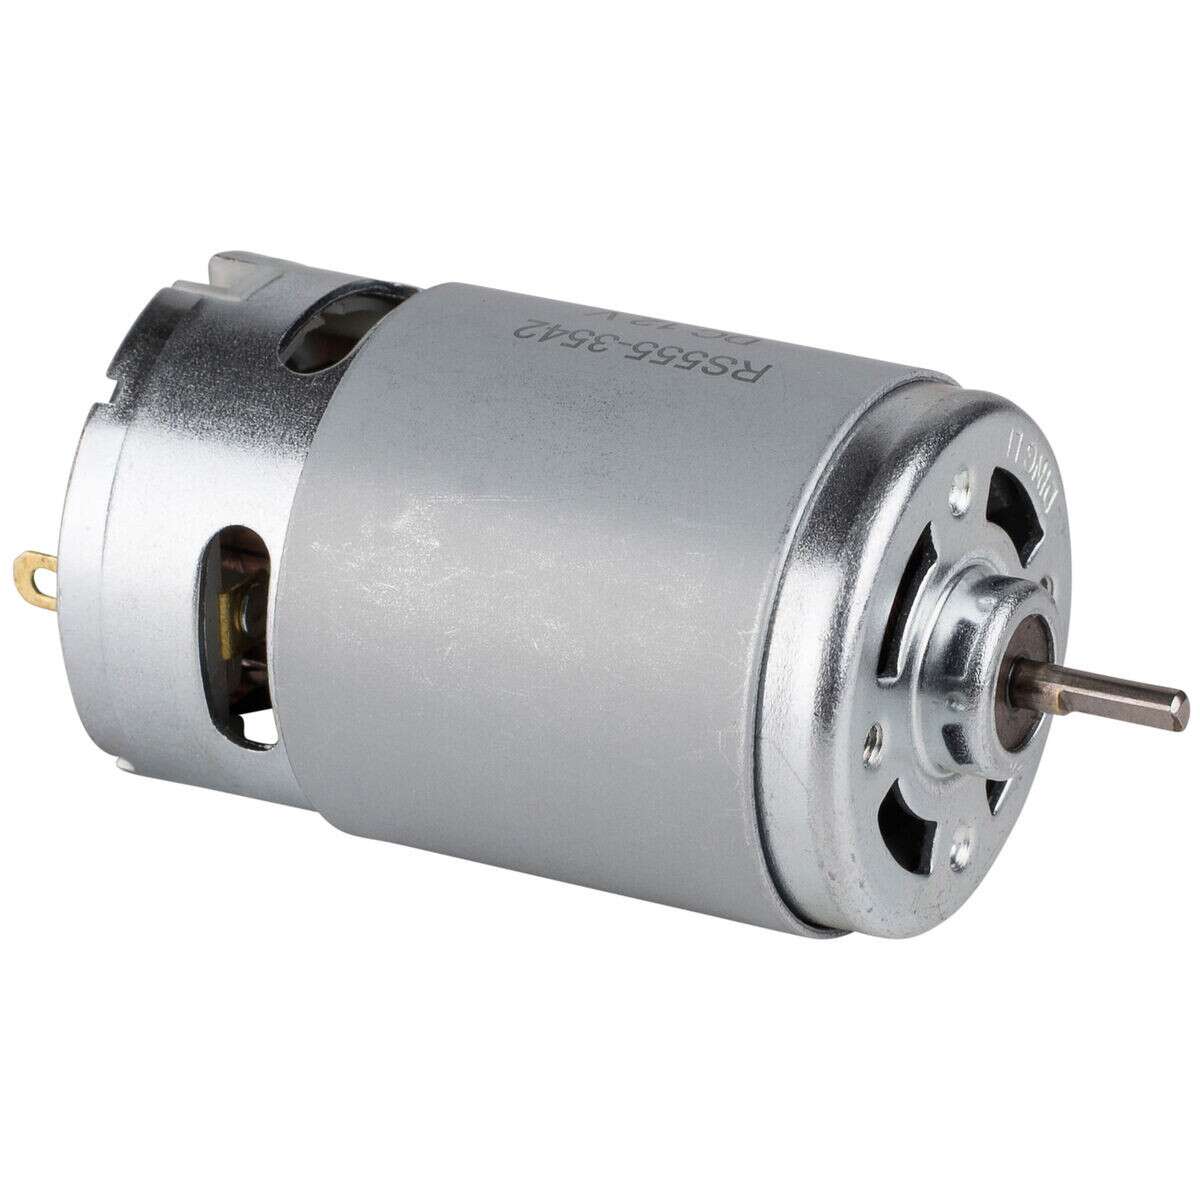 DC motor2 The Difference Between DC Motor and Stepper Motor